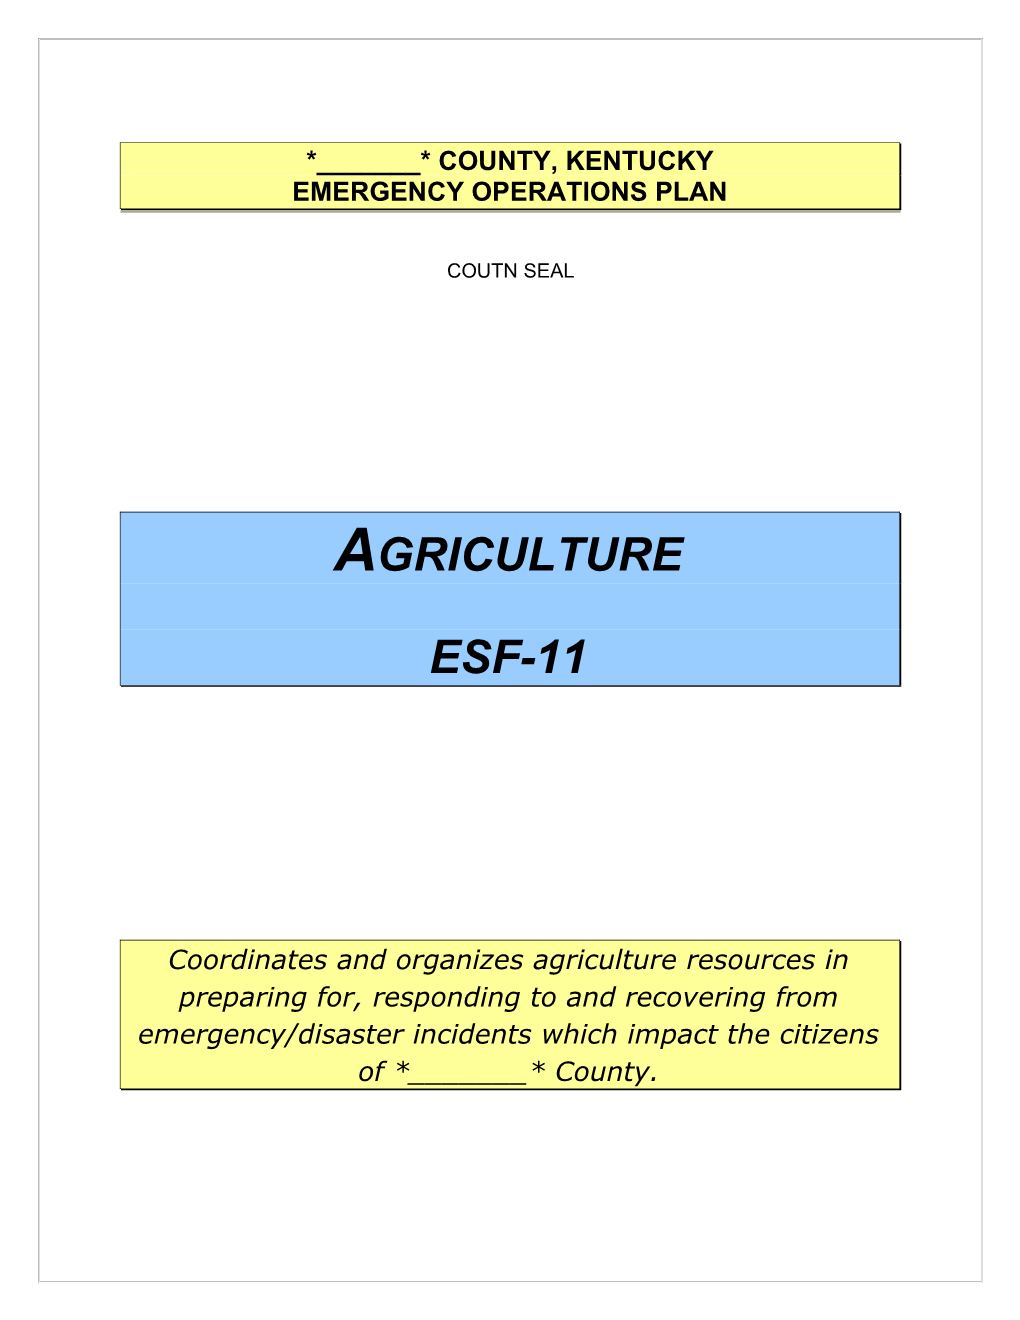 *______* County Emergency Operations Plan